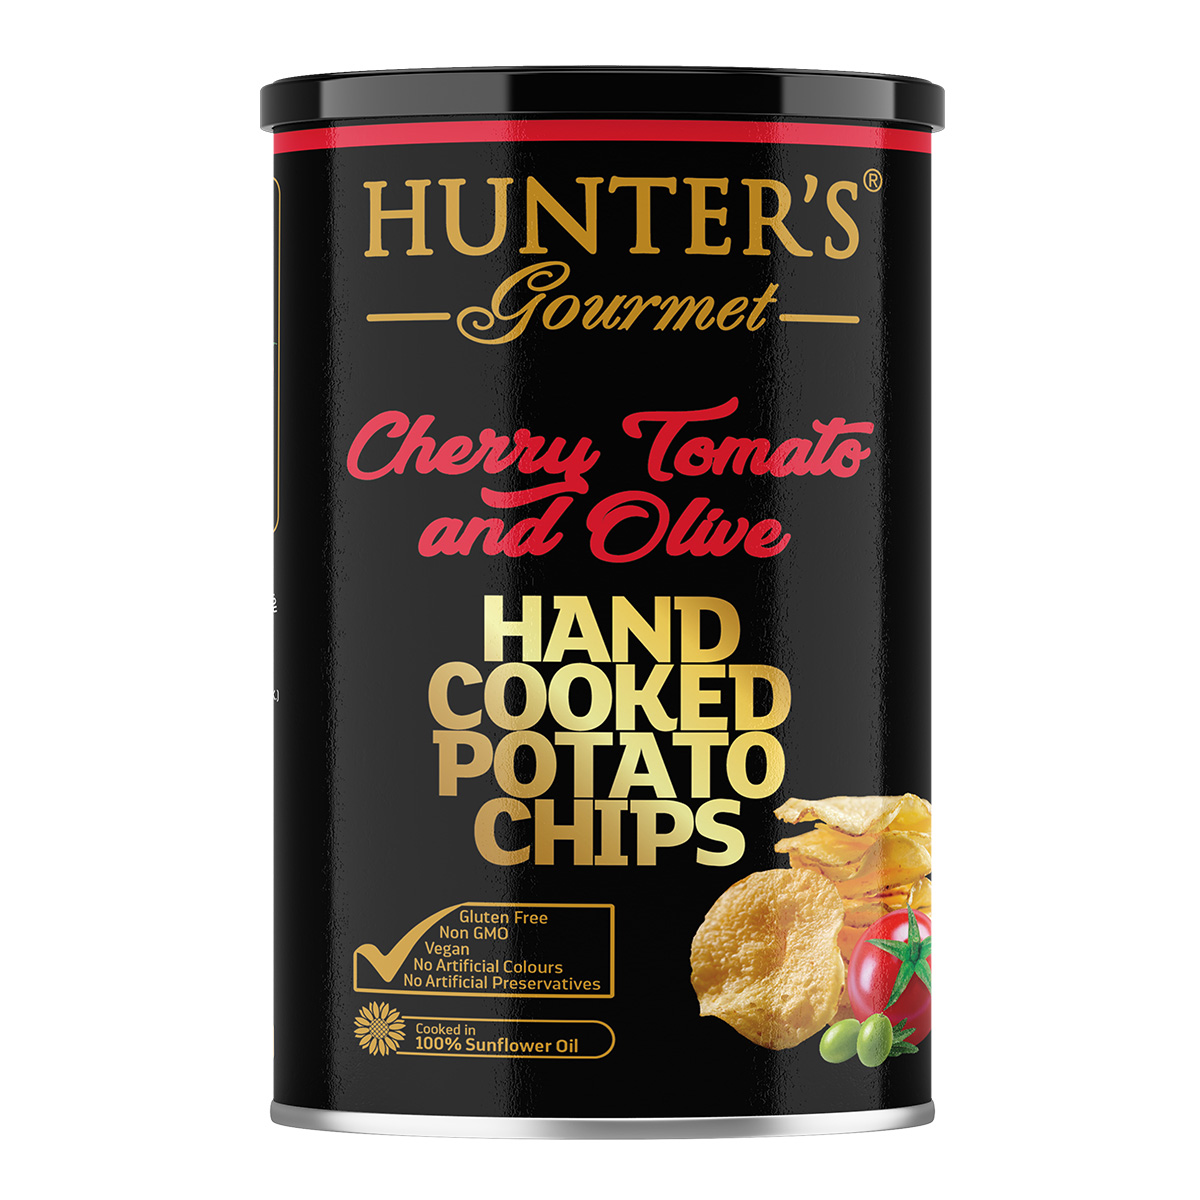 Hunter’s Gourmet Hand Cooked Potato Chips – Cherry Tomato and Olive – Gold Edition (25gm)